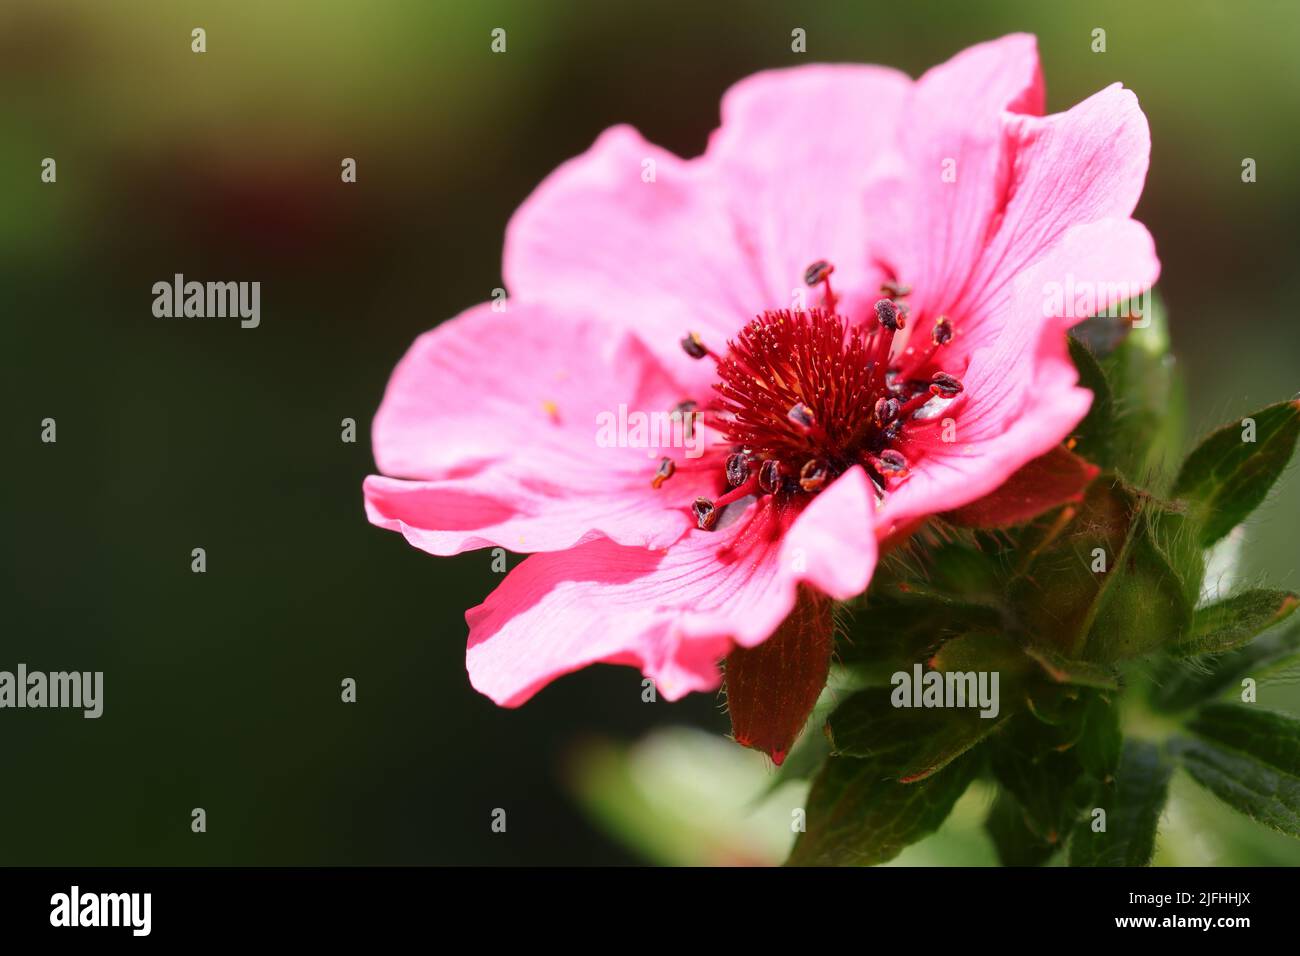 close-up of a beautiful pink potentilla nepalensis against a green blurry background, copy space Stock Photo